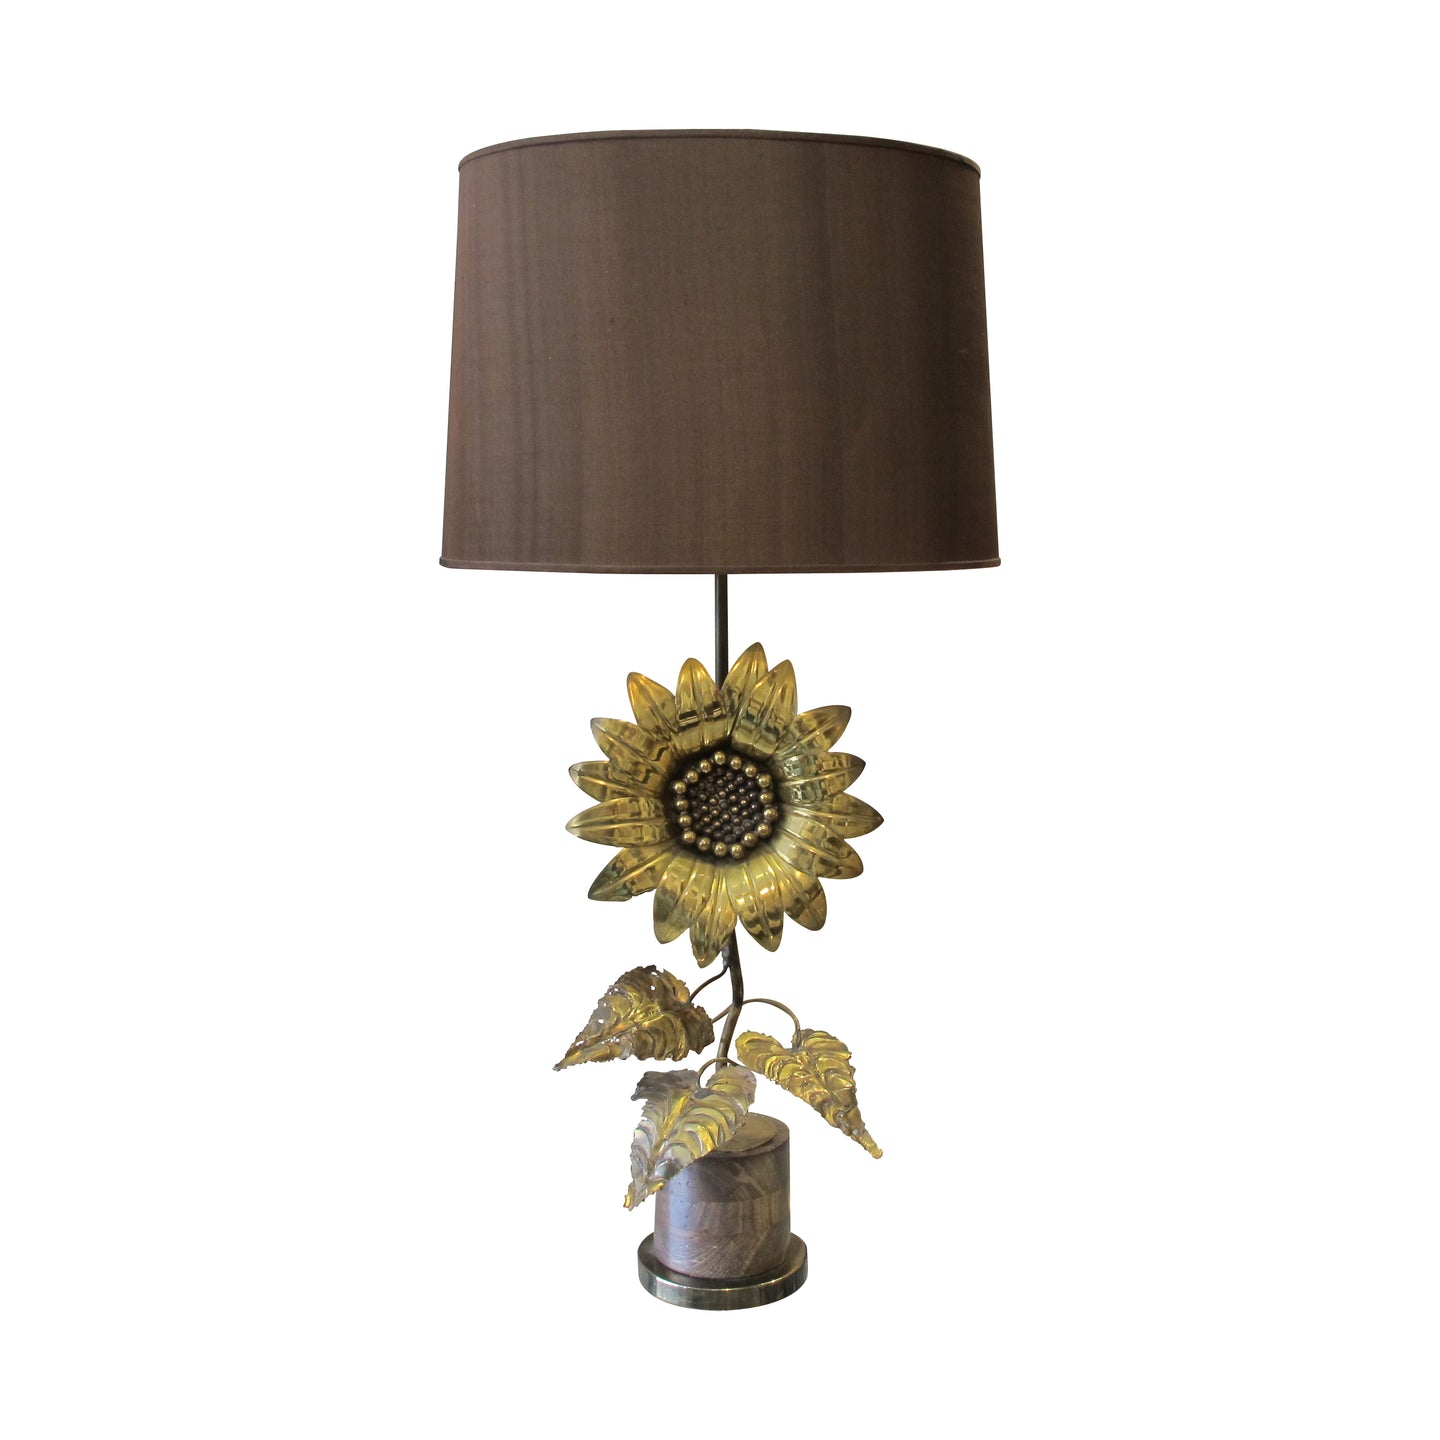 A 1960's brass sunflower lamp, French